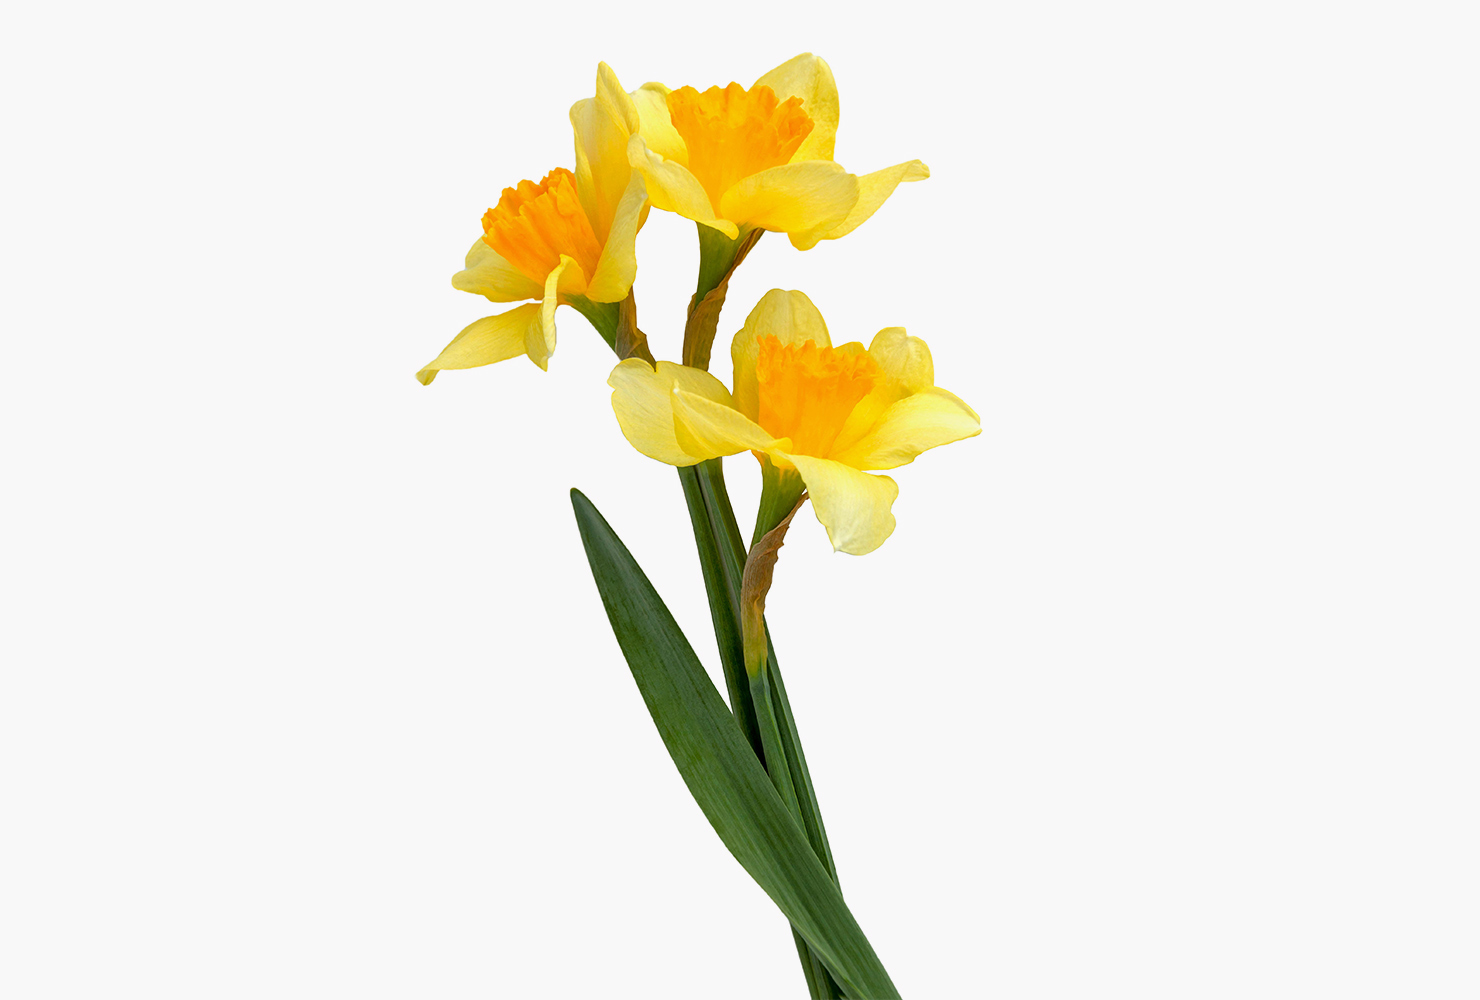 A stem of yellow daffodils.